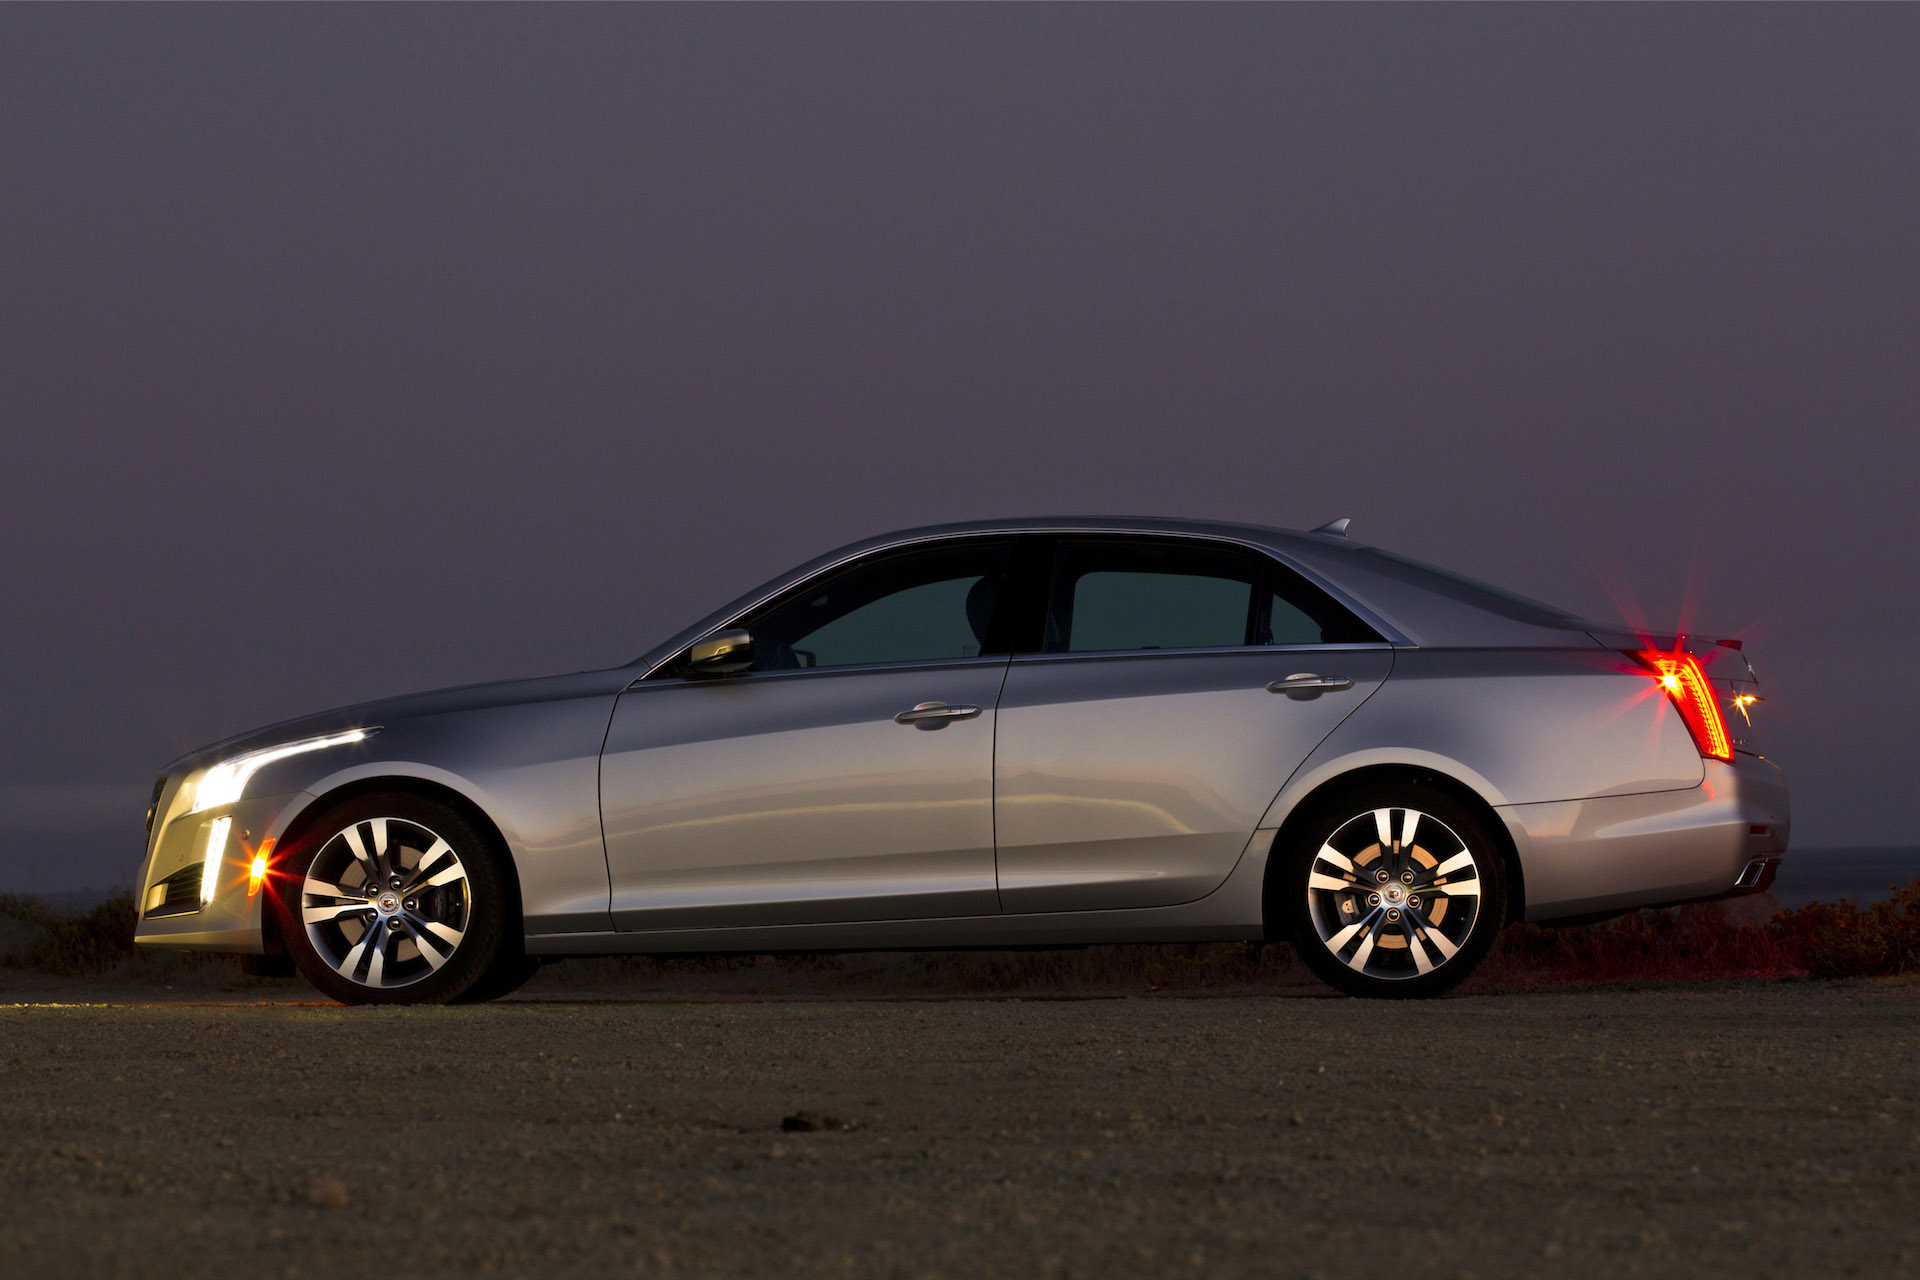 2015 Cadillac Cts Sedan Gets Coupe Face Wireless Charging